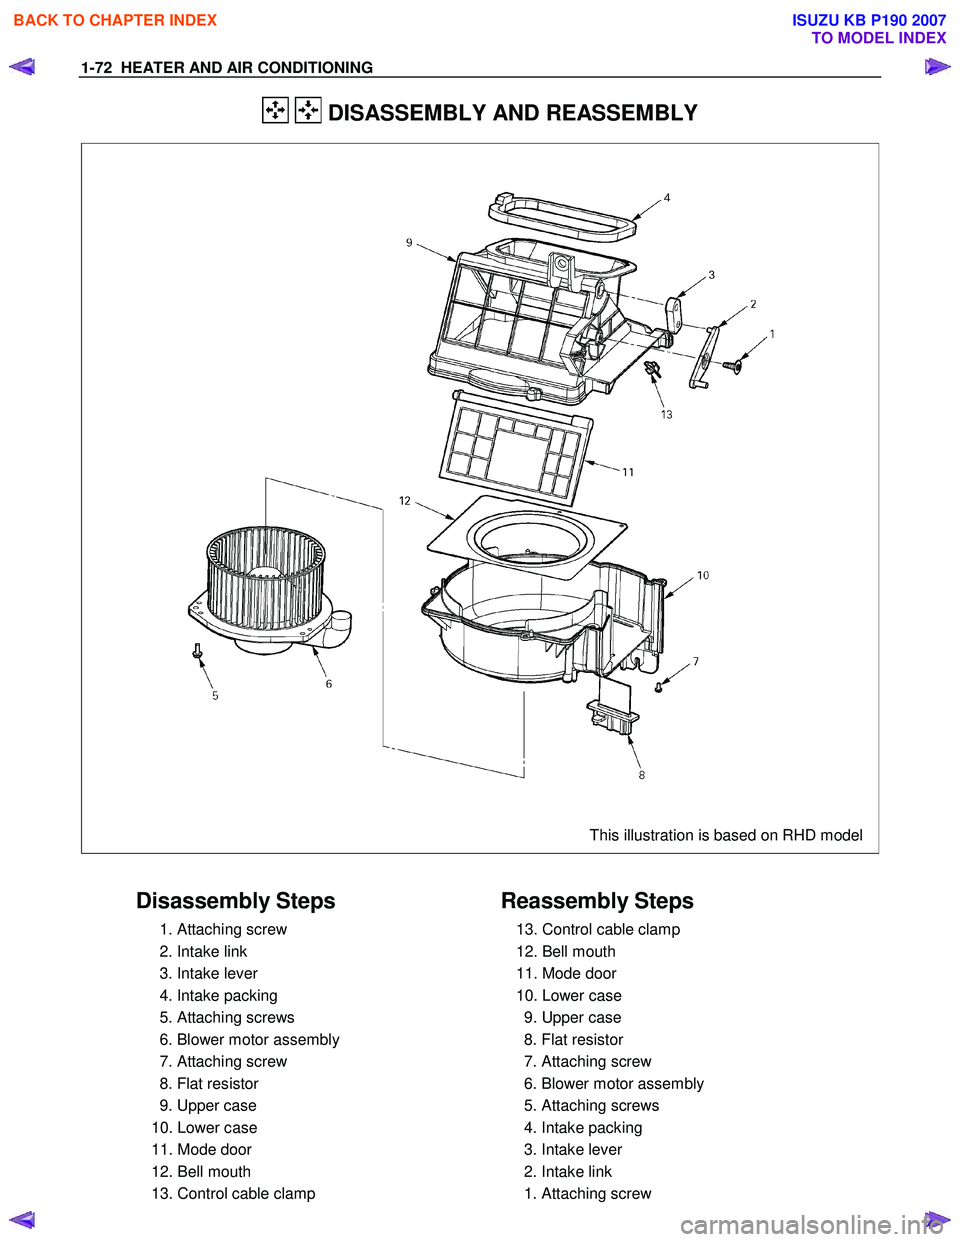 ISUZU KB P190 2007  Workshop Repair Manual 1-72  HEATER AND AIR CONDITIONING 
  DISASSEMBLY AND REASSEMBLY 
   
 
 
 
  This illustration is based on RHD model   
 
 
Disassembly Steps   
  1. Attaching screw  
  2. Intake link 
  3. Intake le